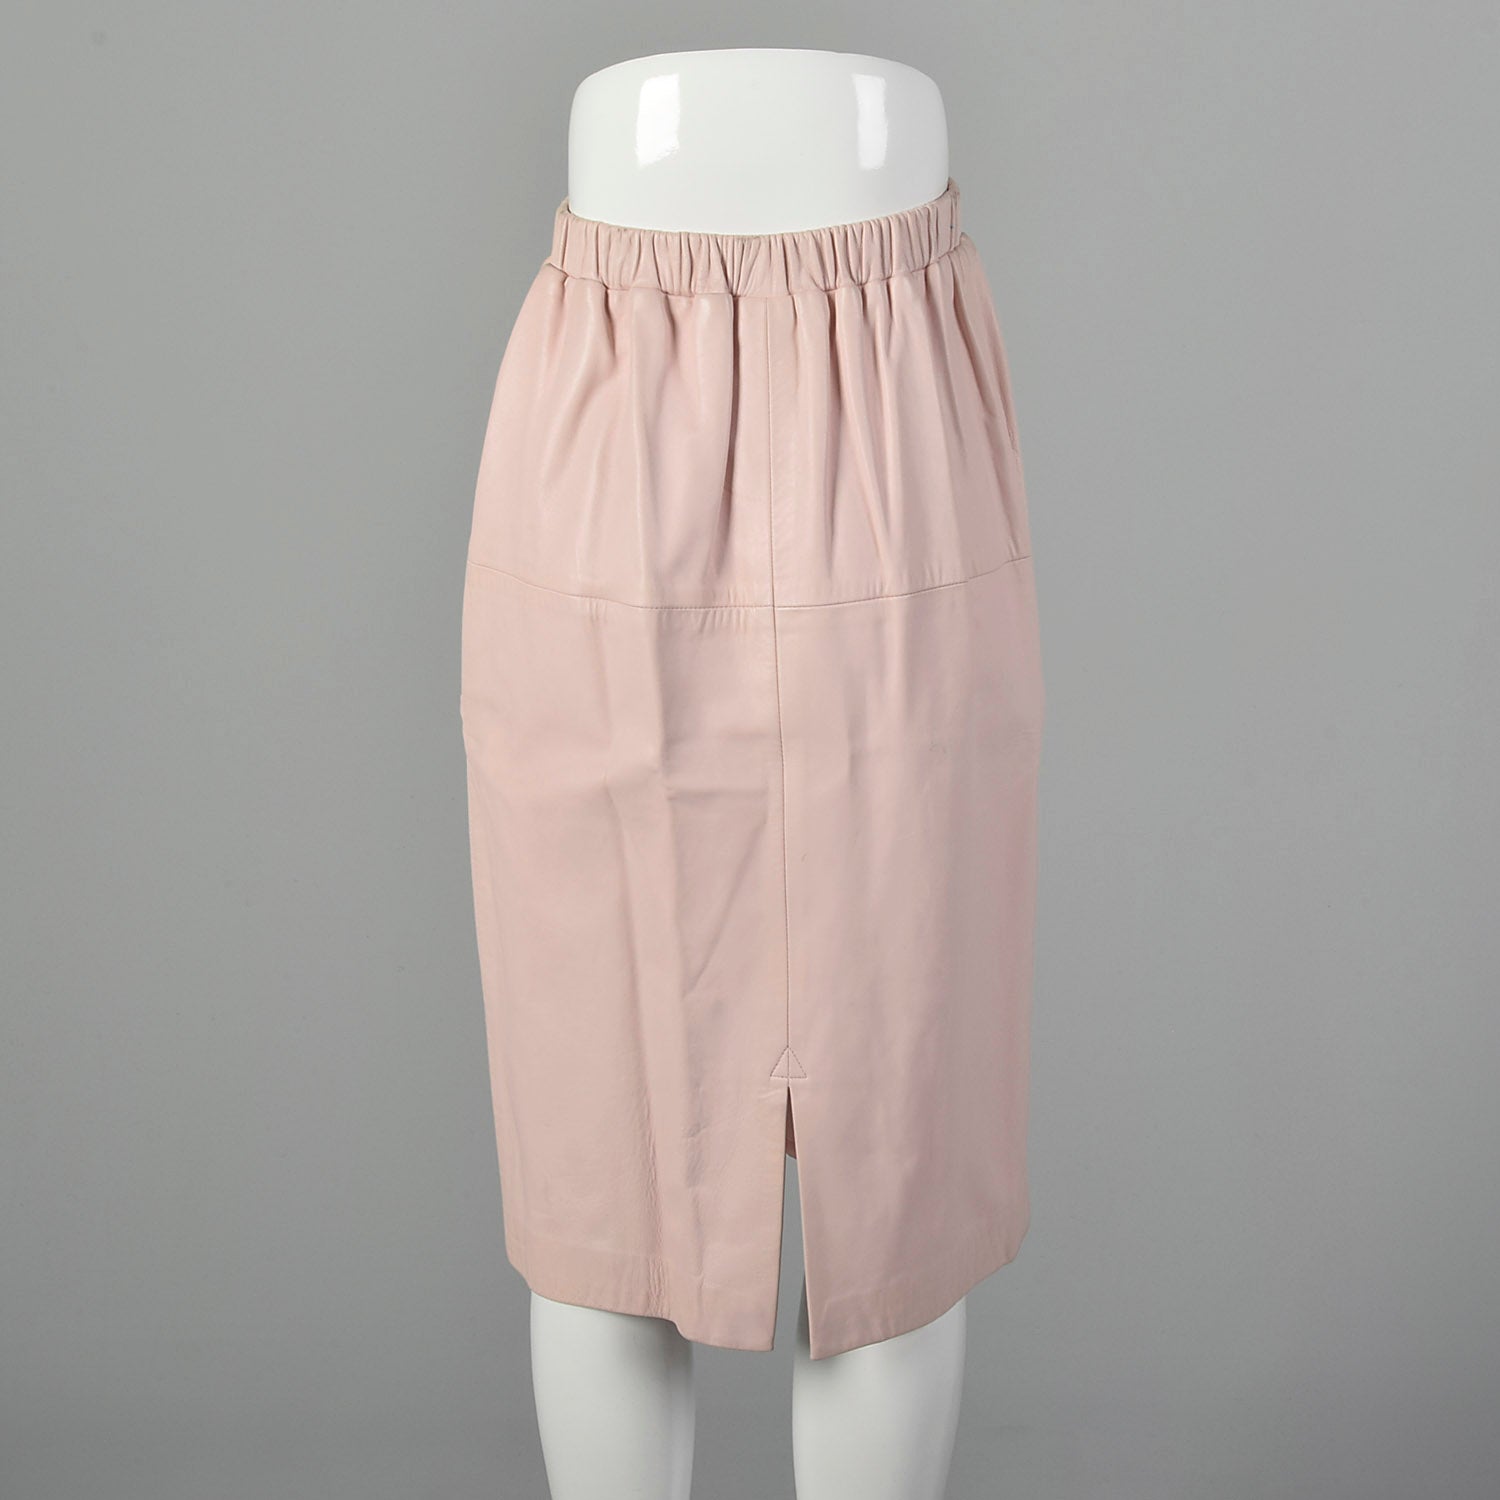 XS Pastel Pink Leather Skirt